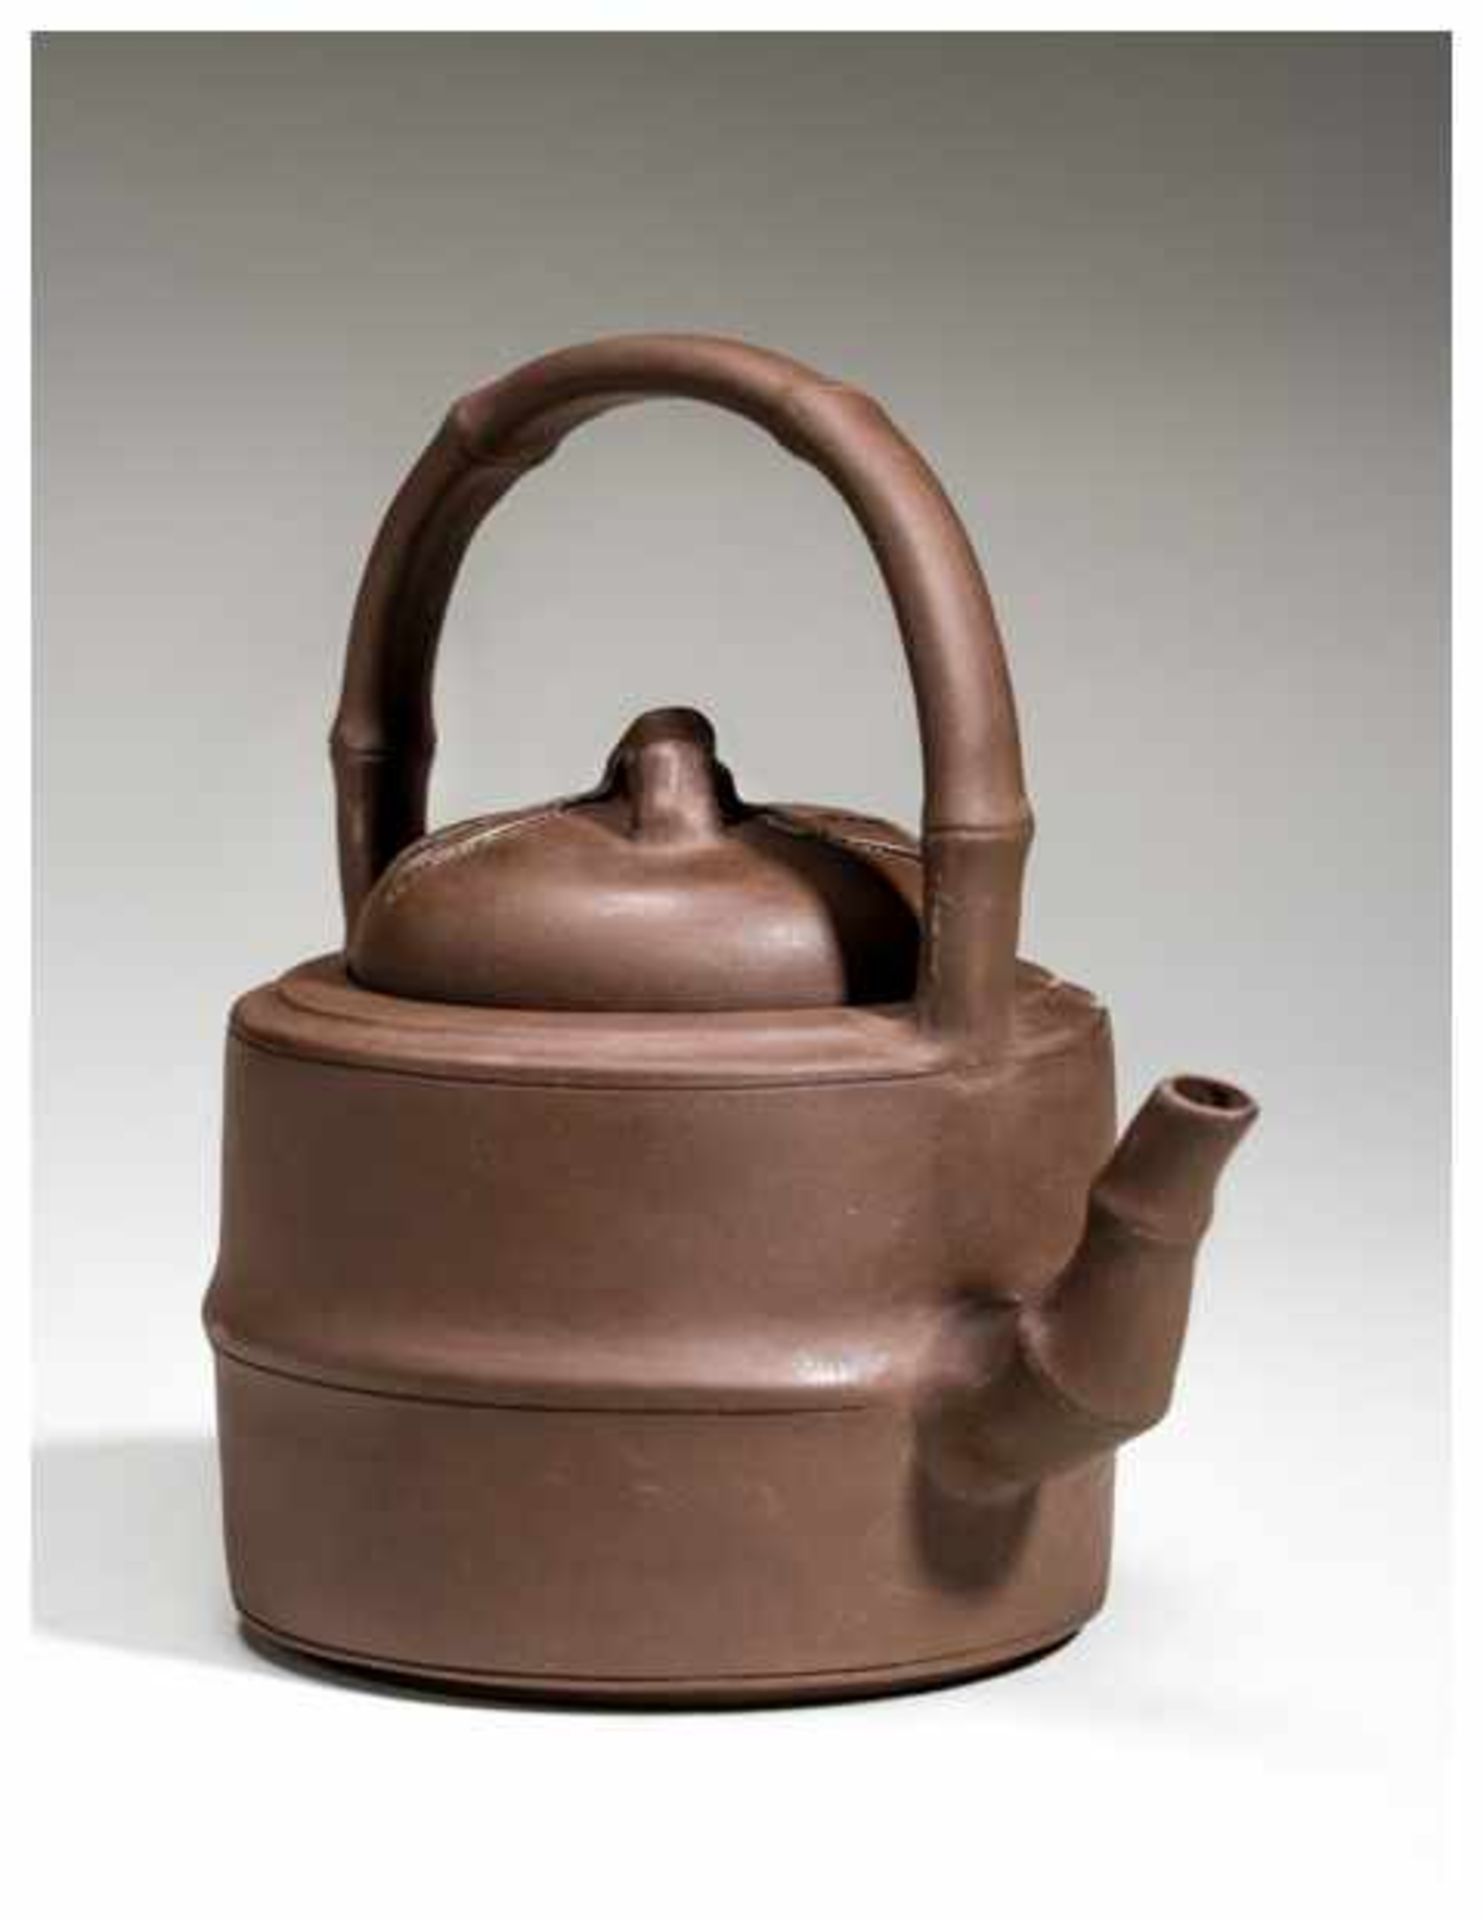 TEAPOT WITH BAMBOO Hard-fired ceramic. China, Typical, very precisely made, yixing ceramic. The - Image 3 of 7